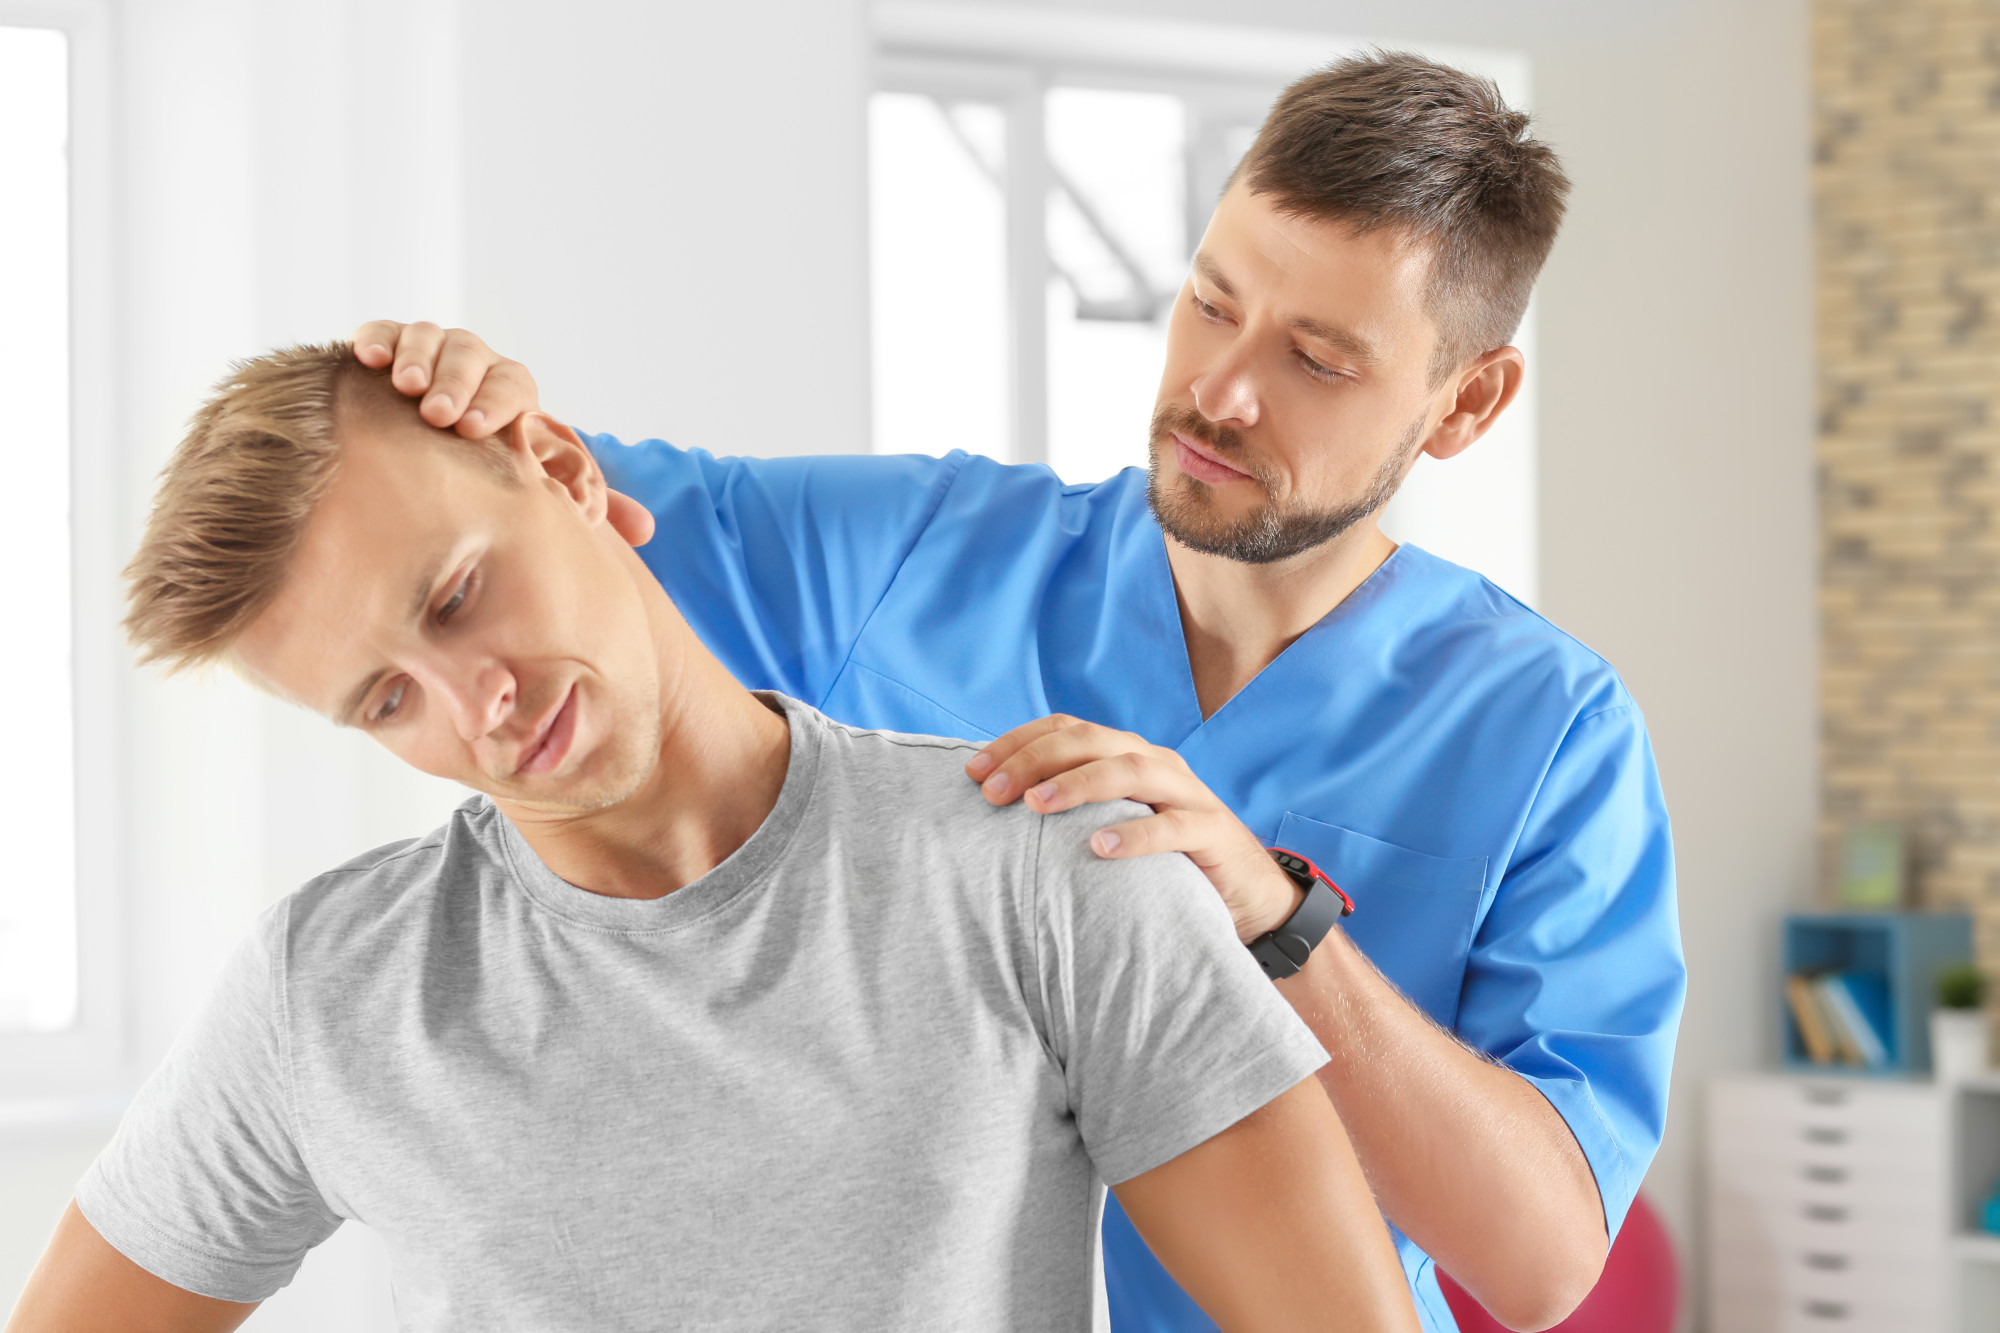 7 Warning Signs You Should See a Chiropractor for Upper Back Pain